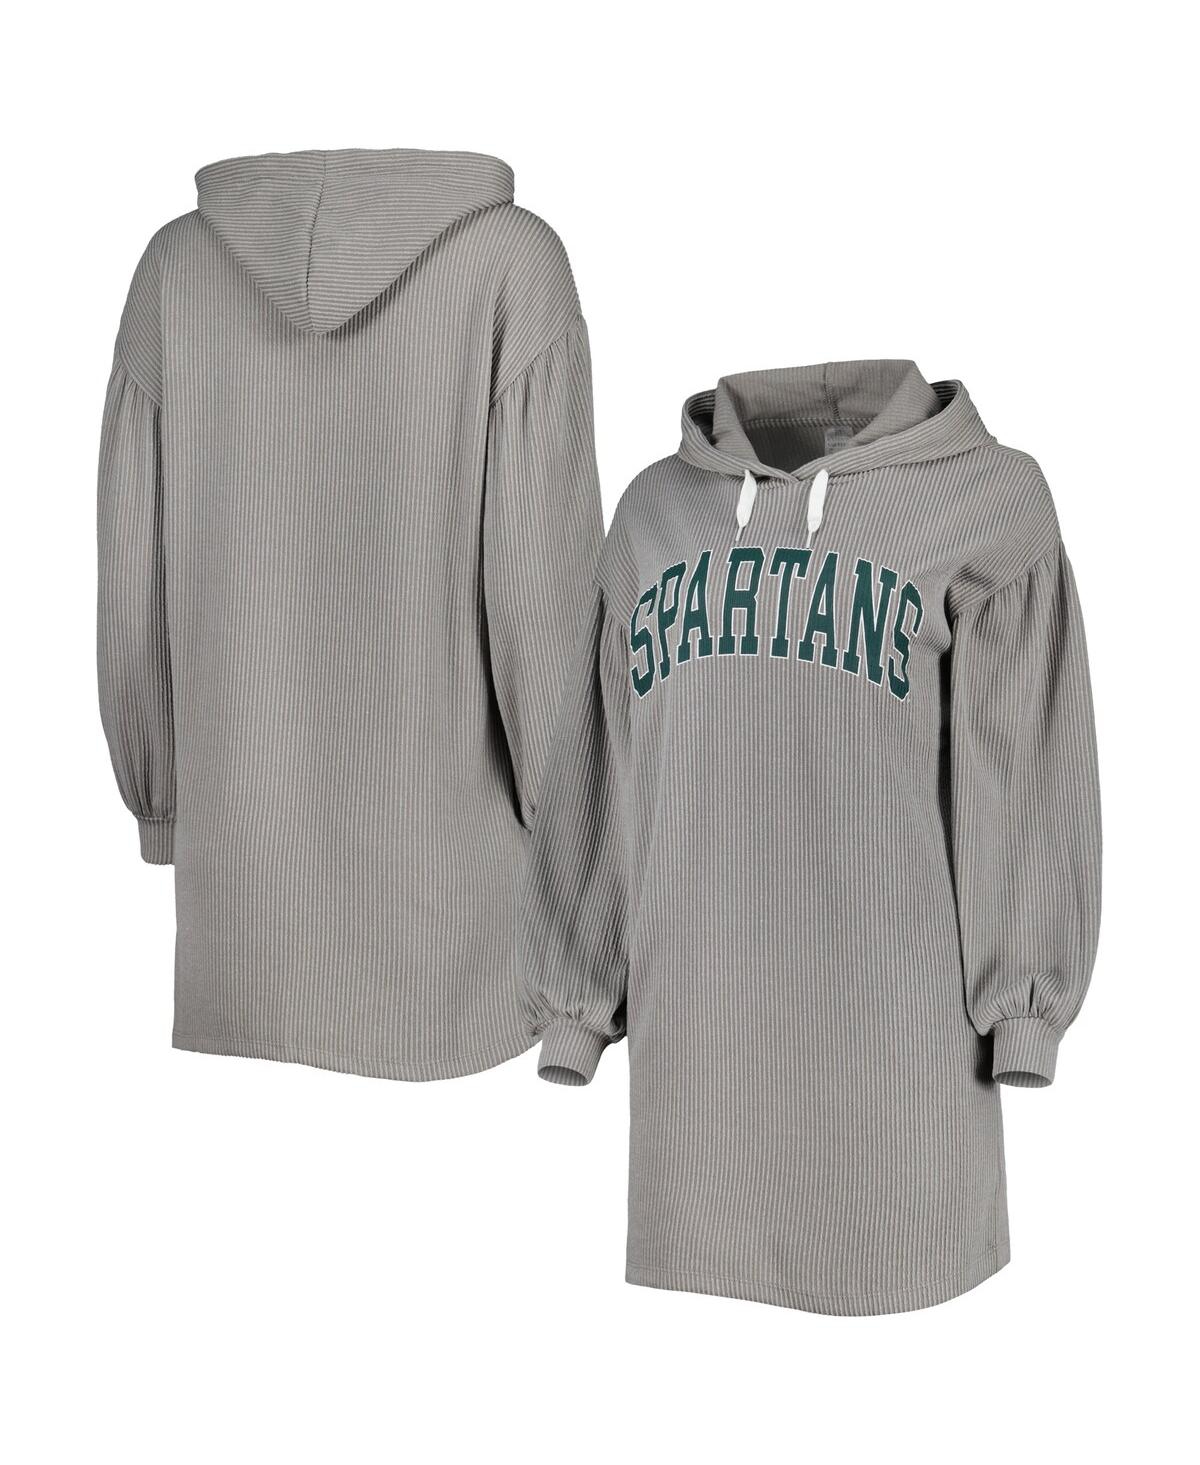 Shop Gameday Couture Women's  Gray Michigan State Spartans Game Winner Vintage-like Wash Tri-blend Dress